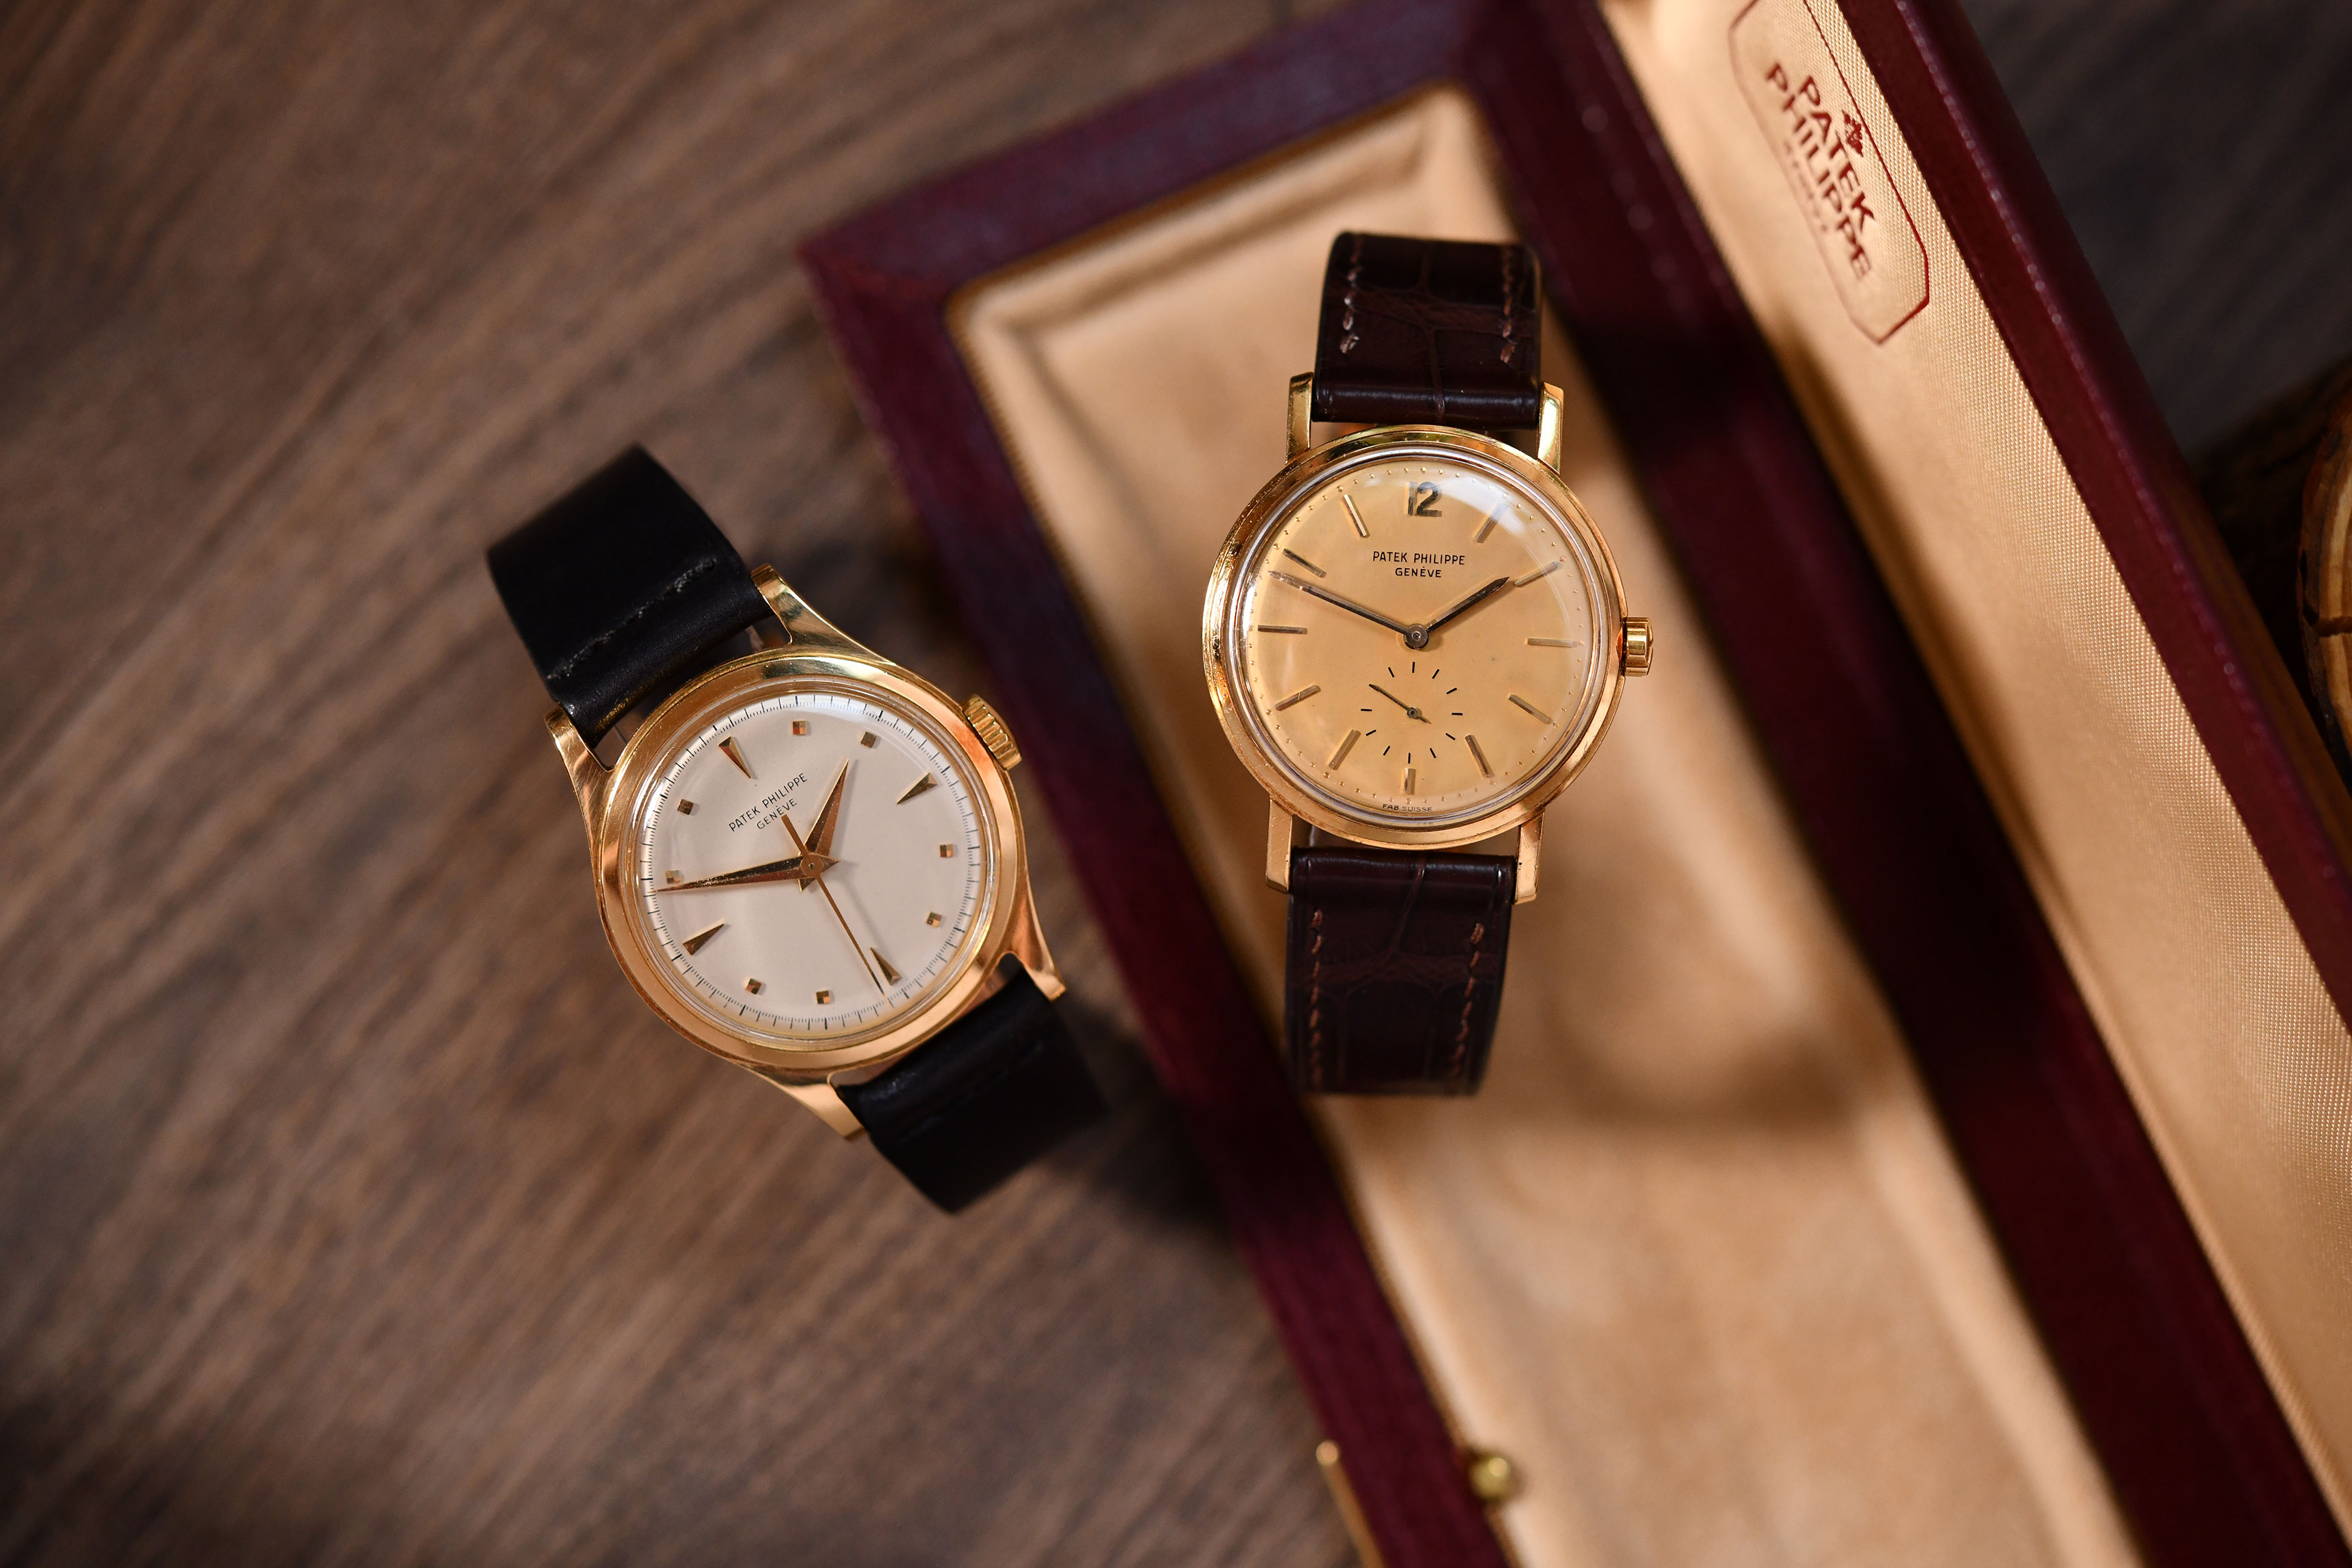 2ToneVintage Watches - The finest collection of vintage luxury timepieces in Singapore